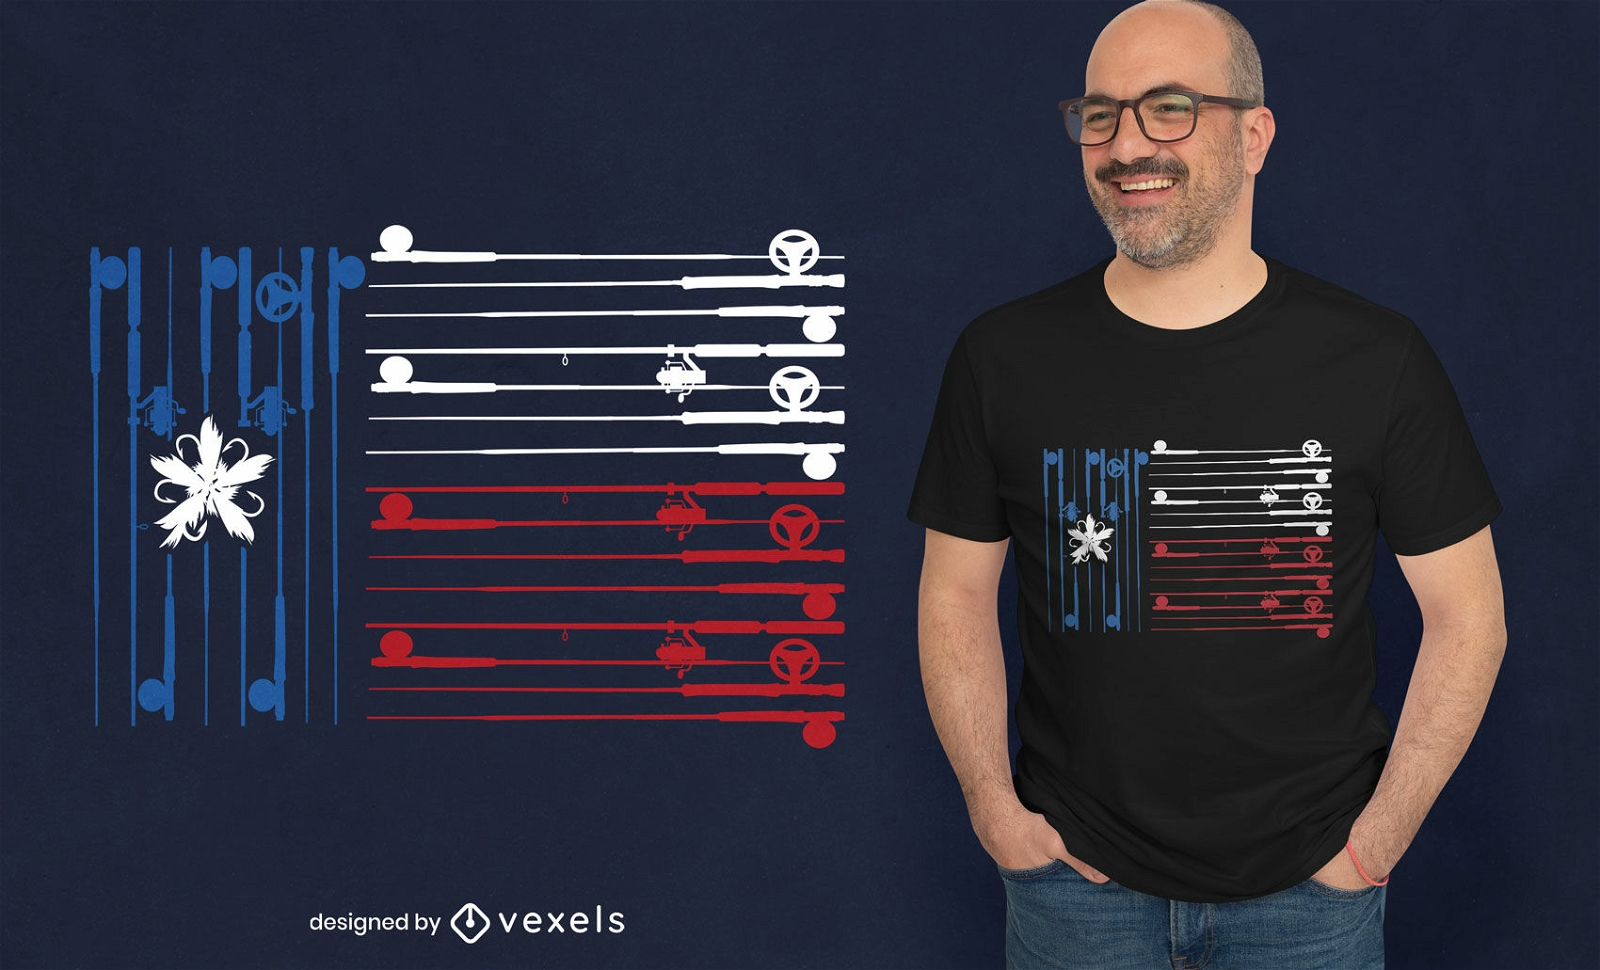 Texs flag with fishing rods t-shirt design